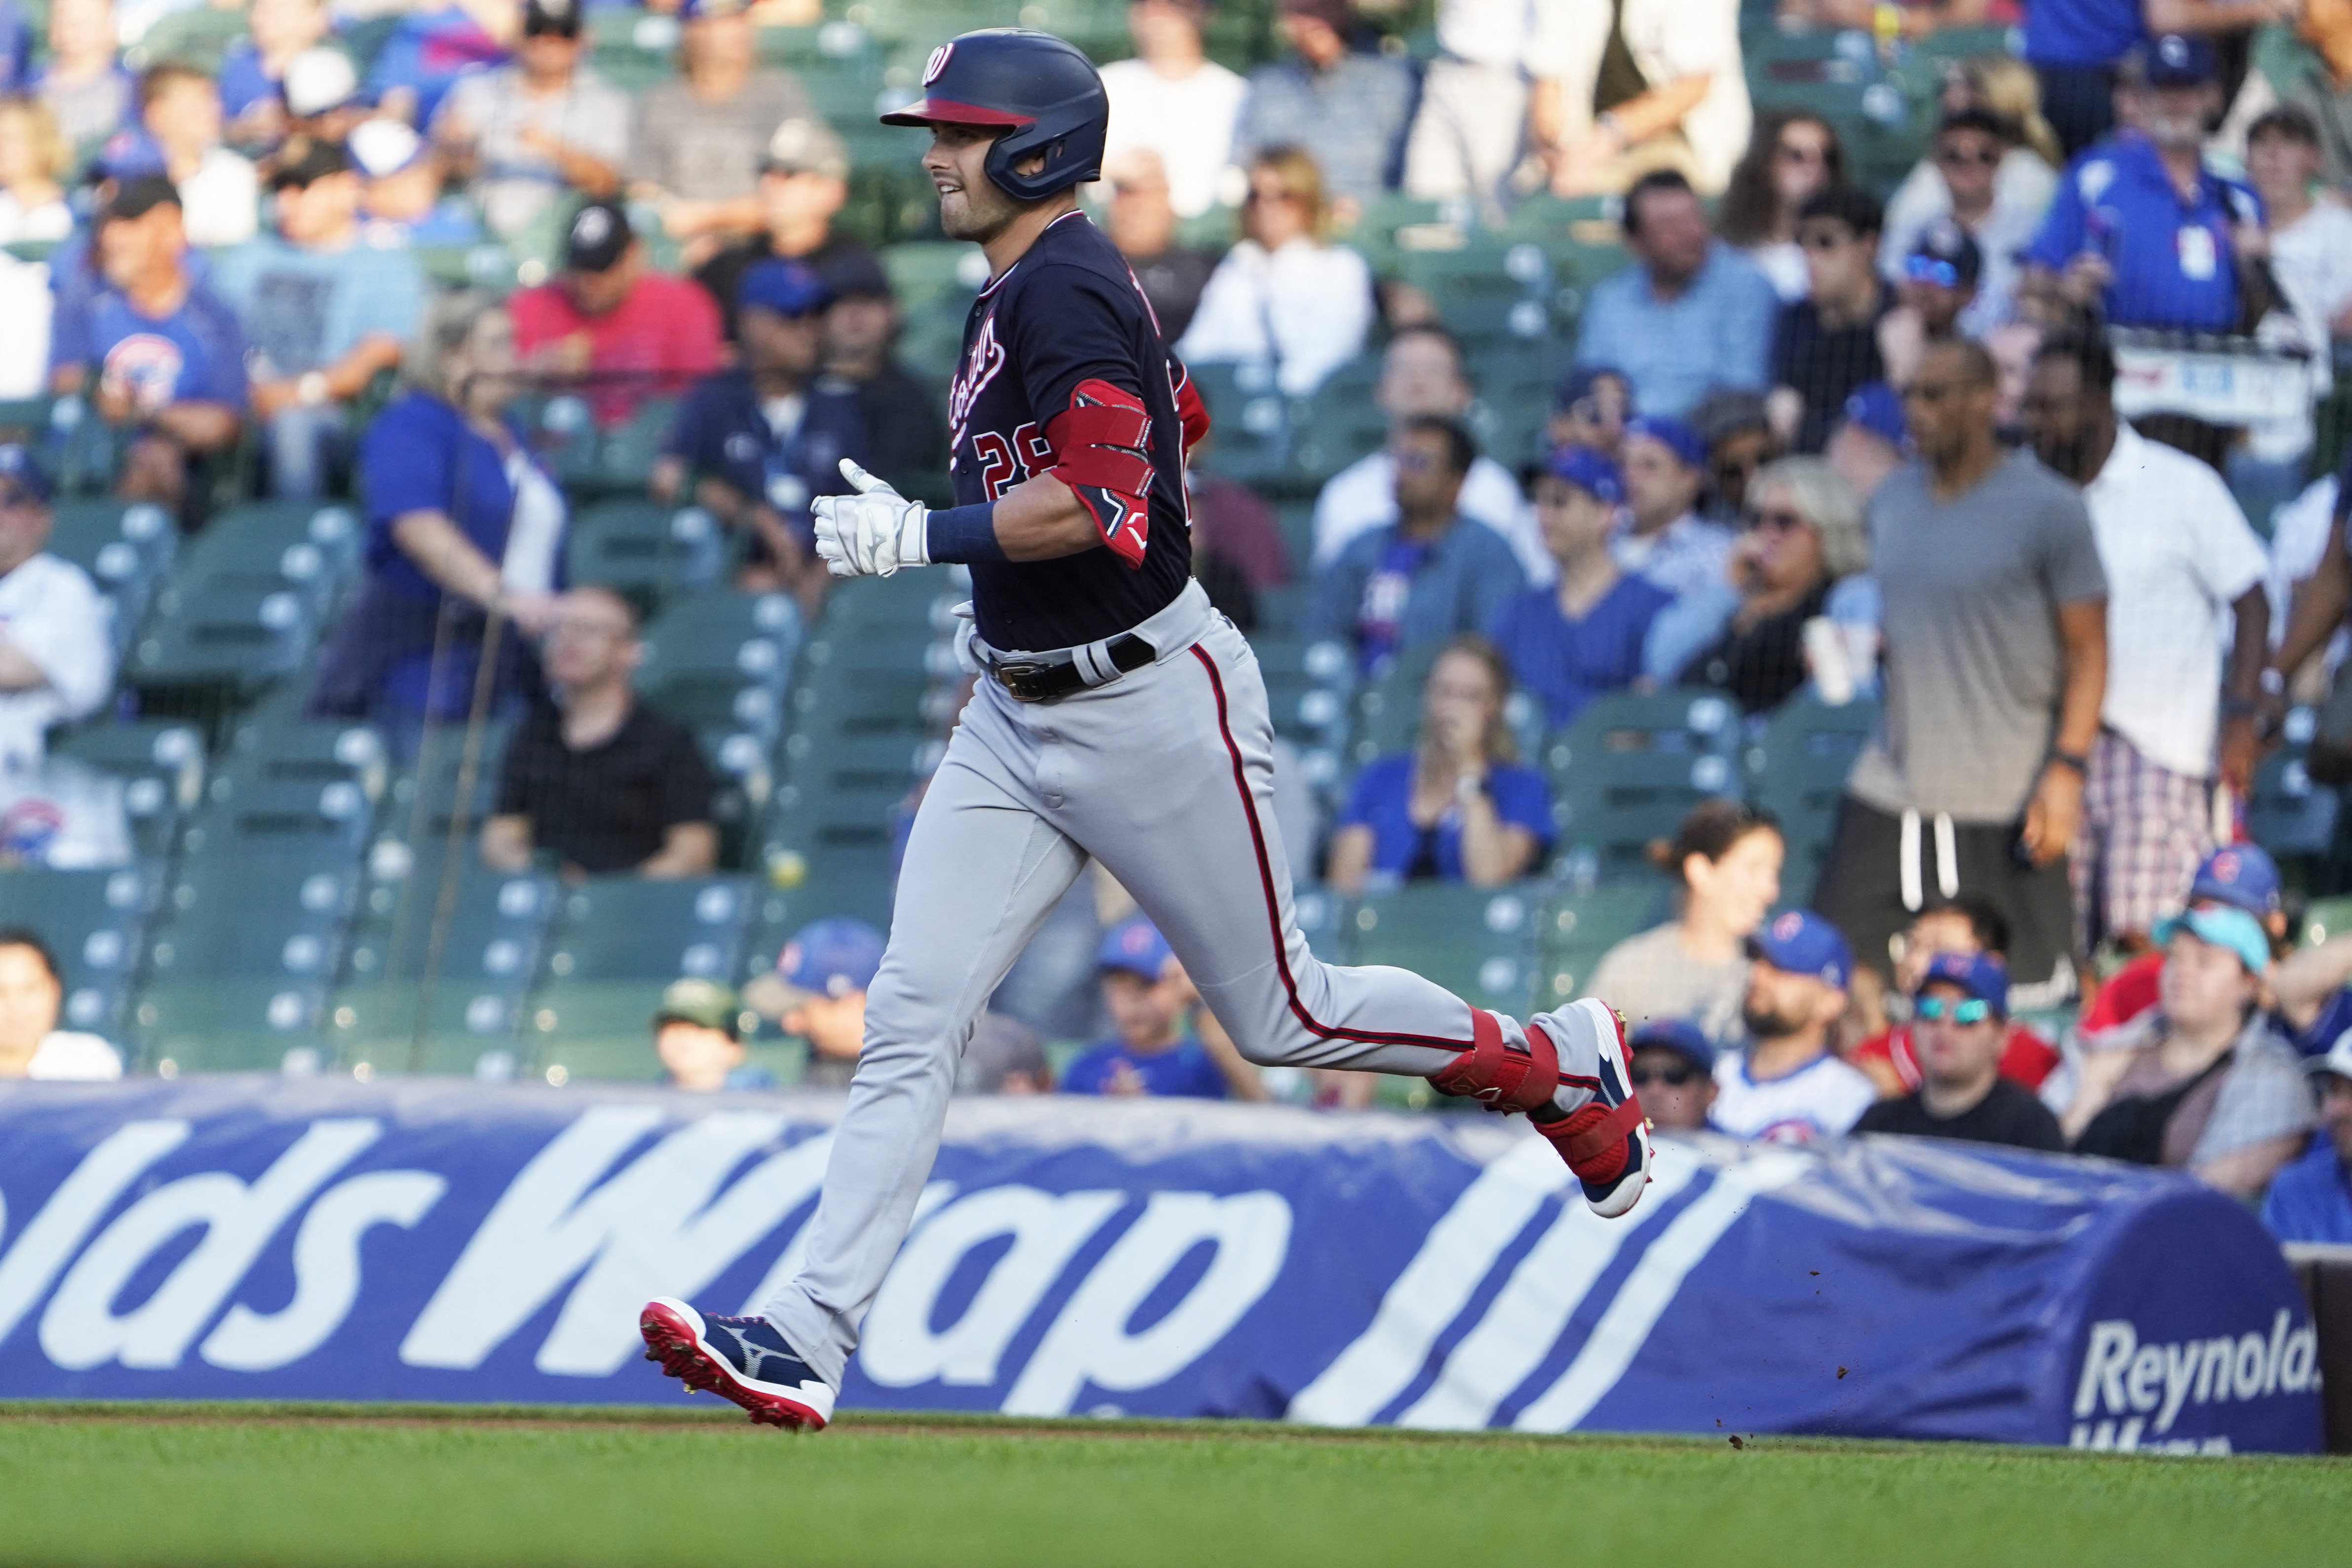 Late explosion lifts Cubs to blowout of Nationals